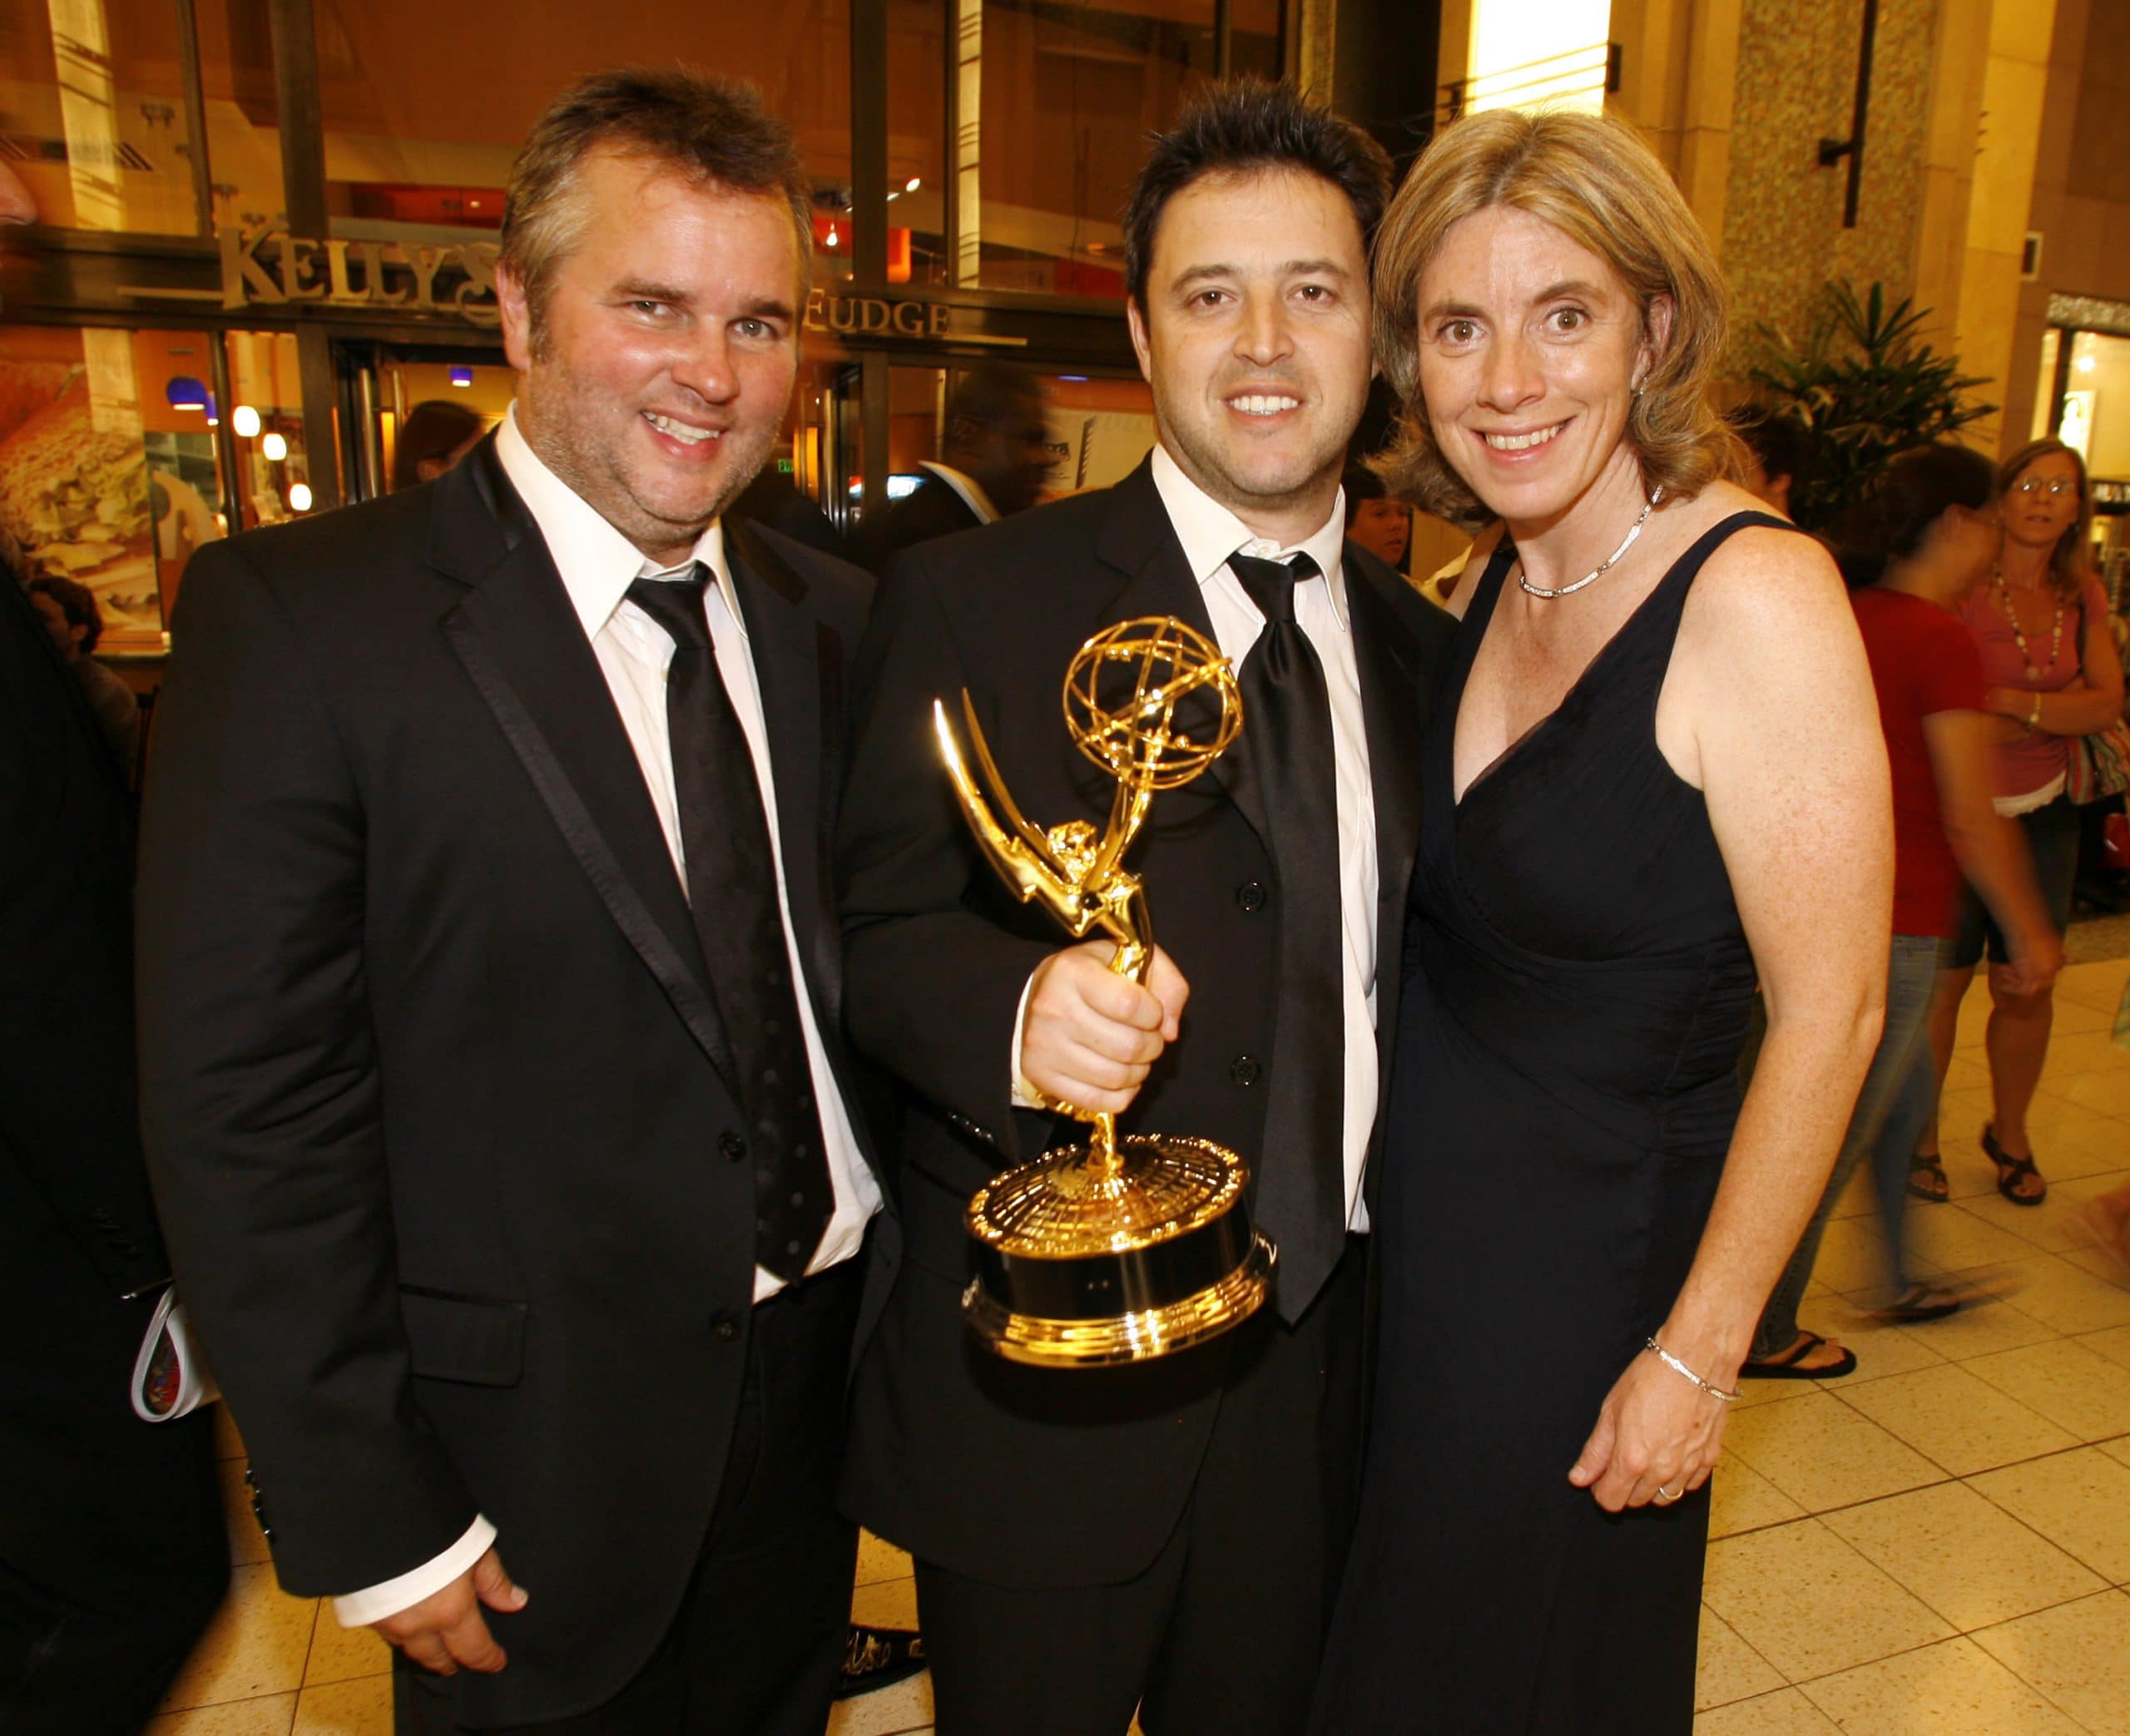 the ellen degeneres show producers Ed Glavin, Andy Lassner and Mary Connelly